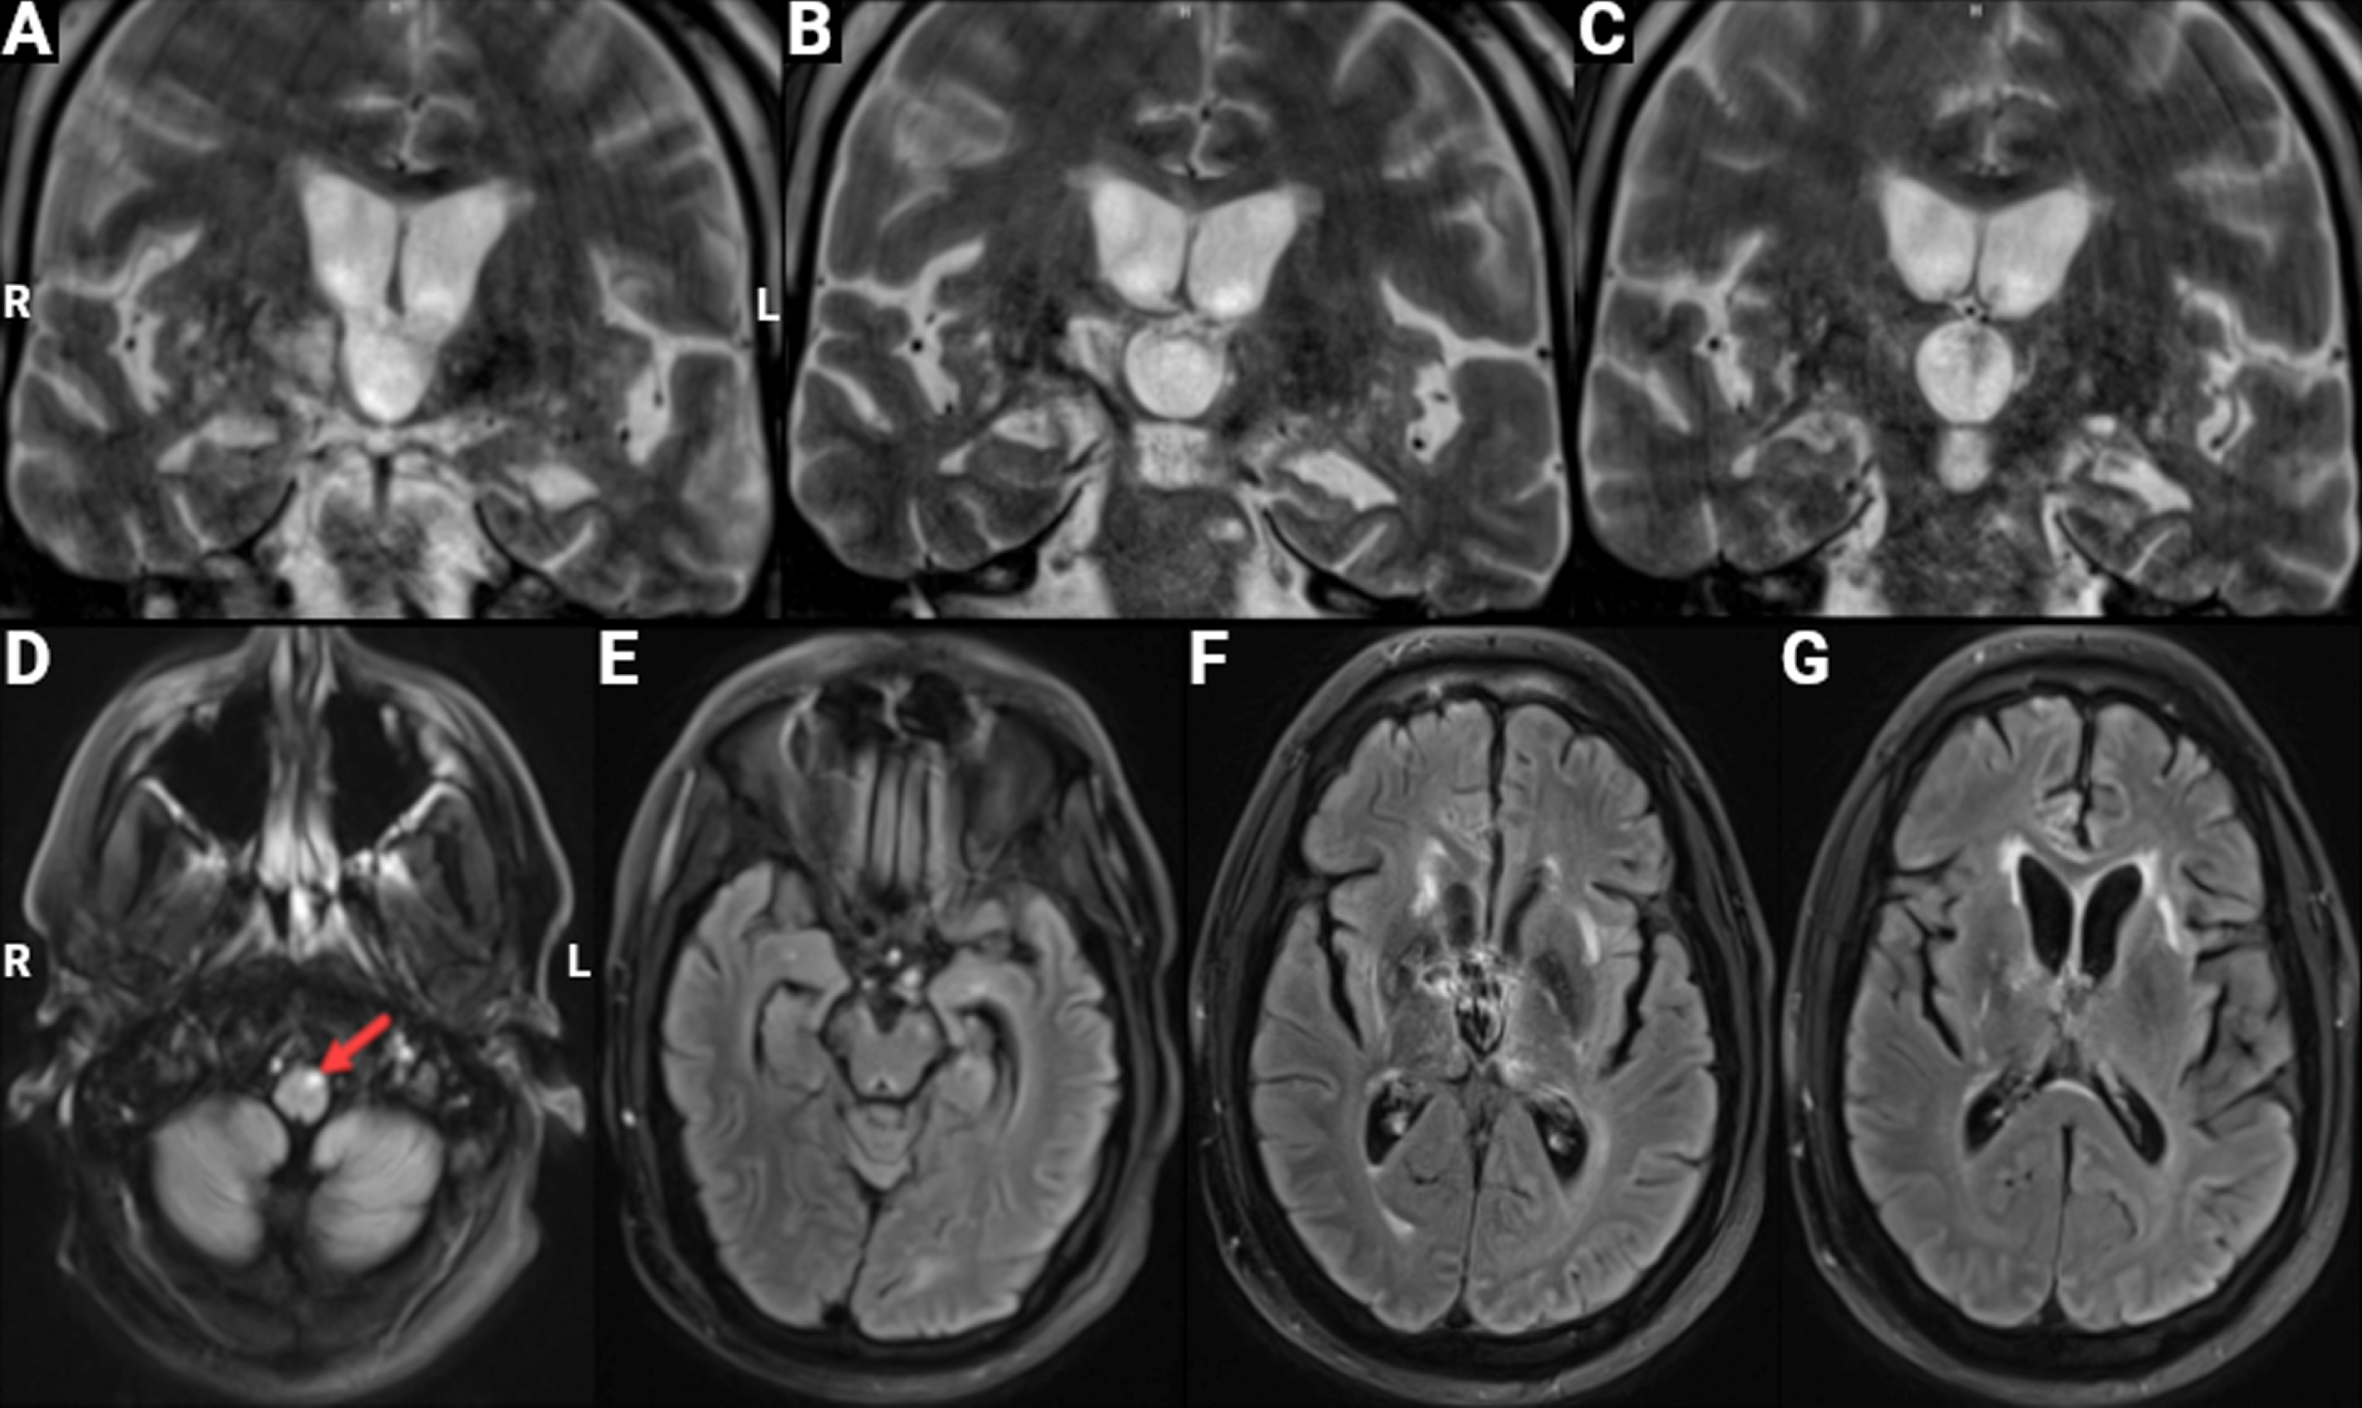 Brain MRI. Images from a February 2022 MRI scan are shown; the obtained images were mildly degraded by motion artifact. A-C) Coronal T2 high-resolution 3MM sequence depicting left greater than right hippocampal volume loss in the anterior, medial, and posterior hippocampus regions. There is also significant ex vacuo dilatation of the third ventricle. D-G) Axial T2 FLAIR BLADE sequence showing focal signal hyperintensity (arrow) in the pyramidal tract on the left (D), potentially reflective of Wallerian degeneration consequent to a past stroke or selective primary degeneration of upper motor neurons. There are small, chronic, bilateral signal changes thought to represent sequelae of subcortical infarcts in the anterior temporal (E), basal ganglia/thalamus (F), and internal capsule (G) regions.